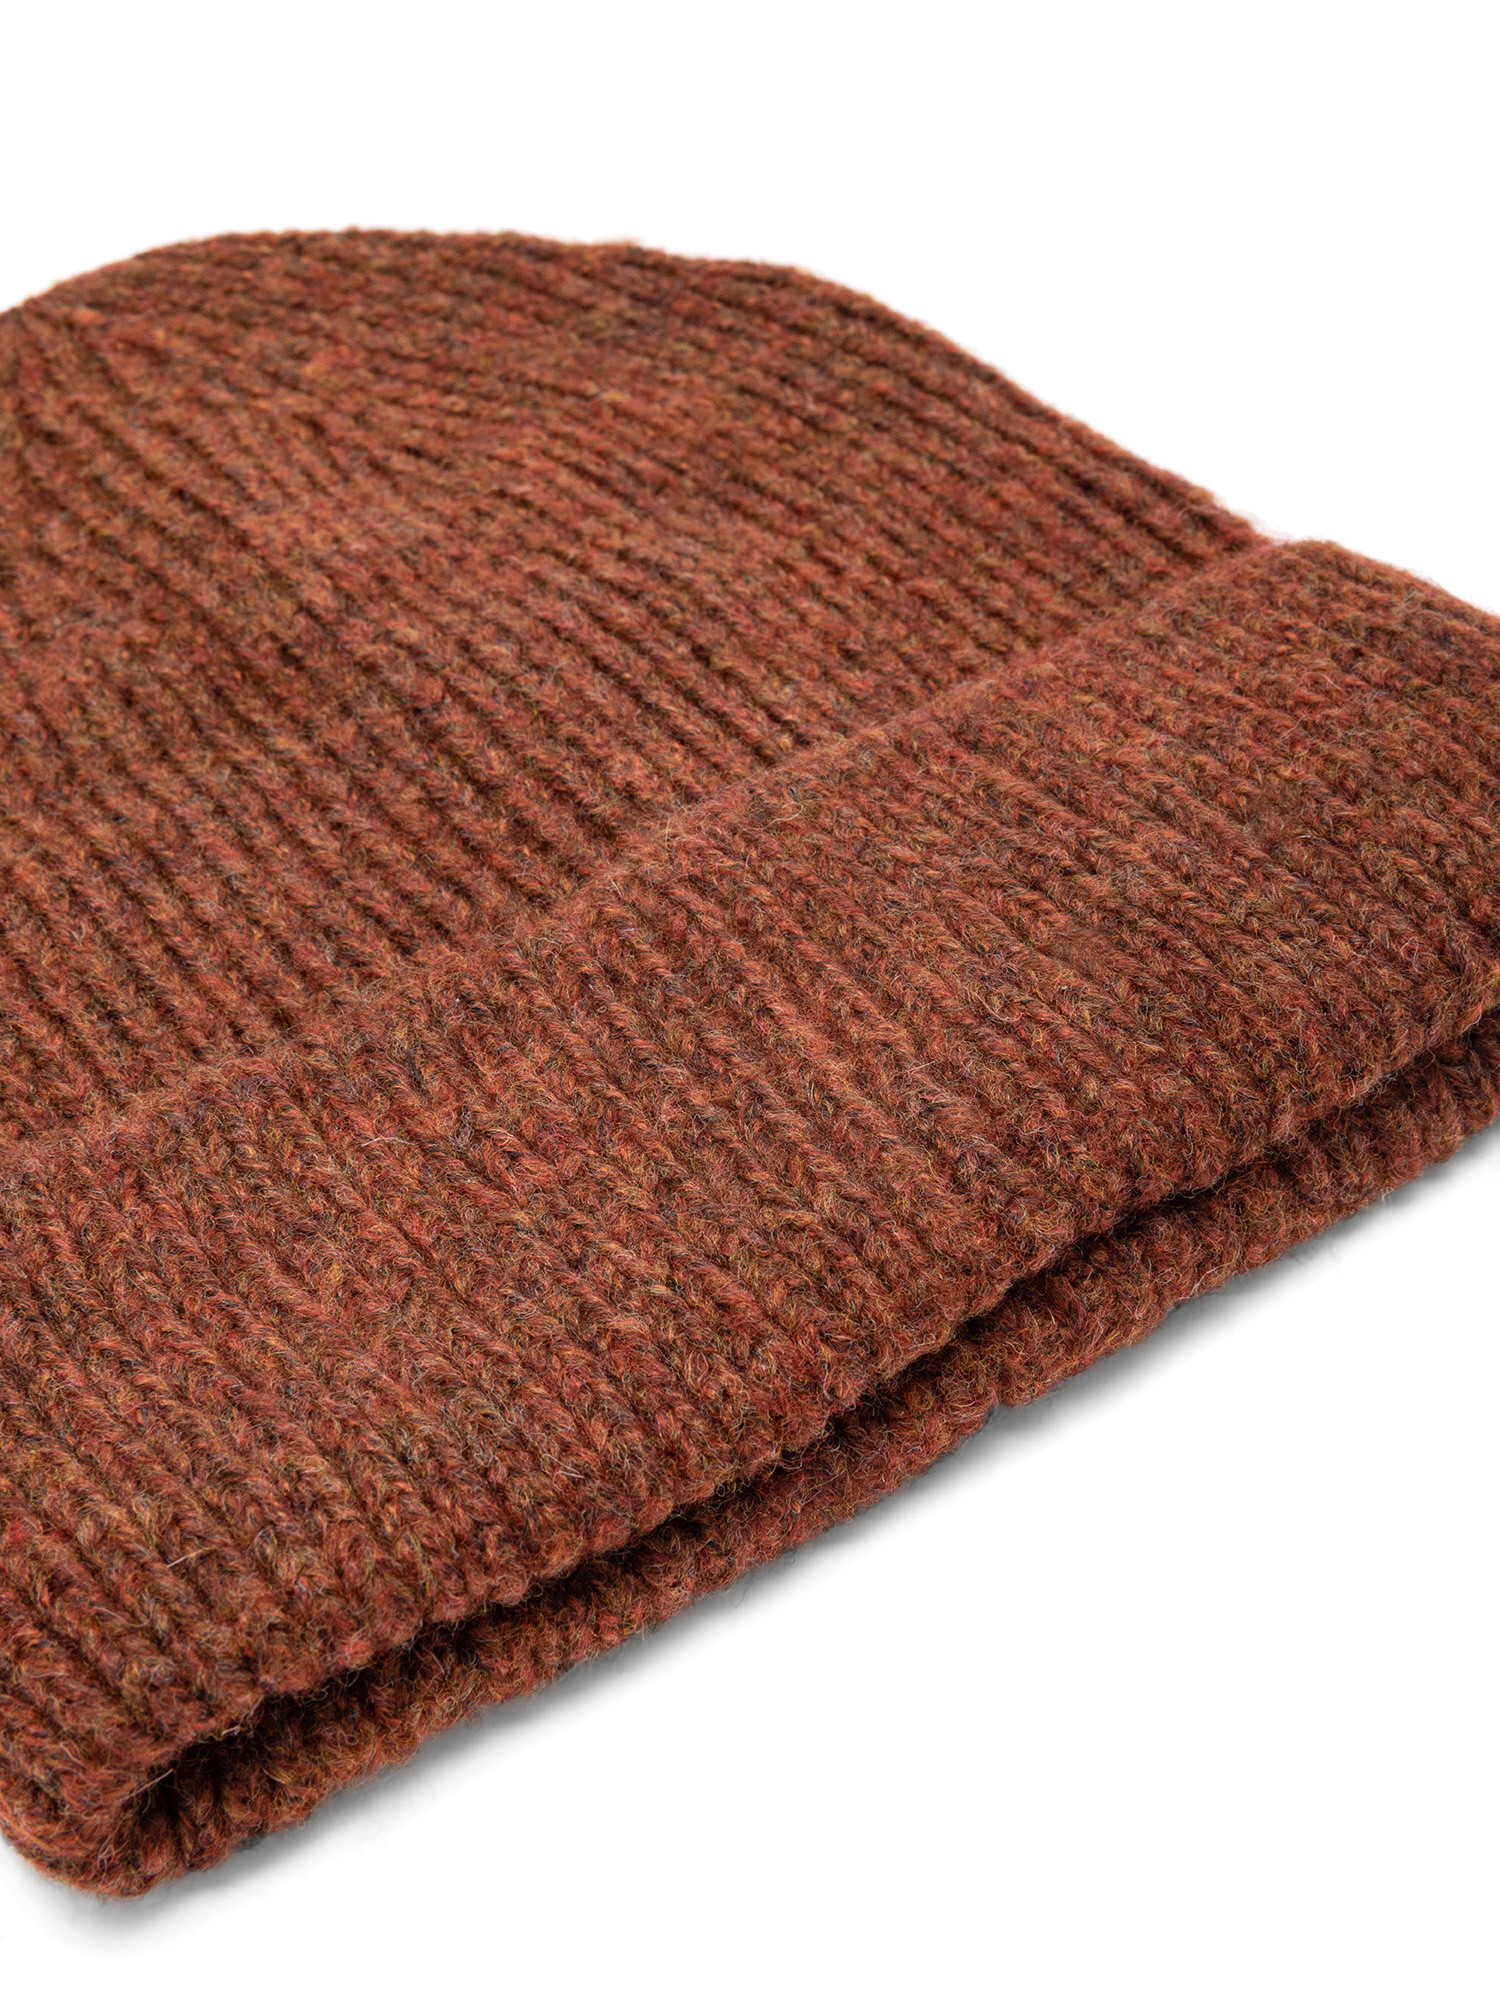 Luca D'Altieri - Ribbed beanie, Copper Brown, large image number 1